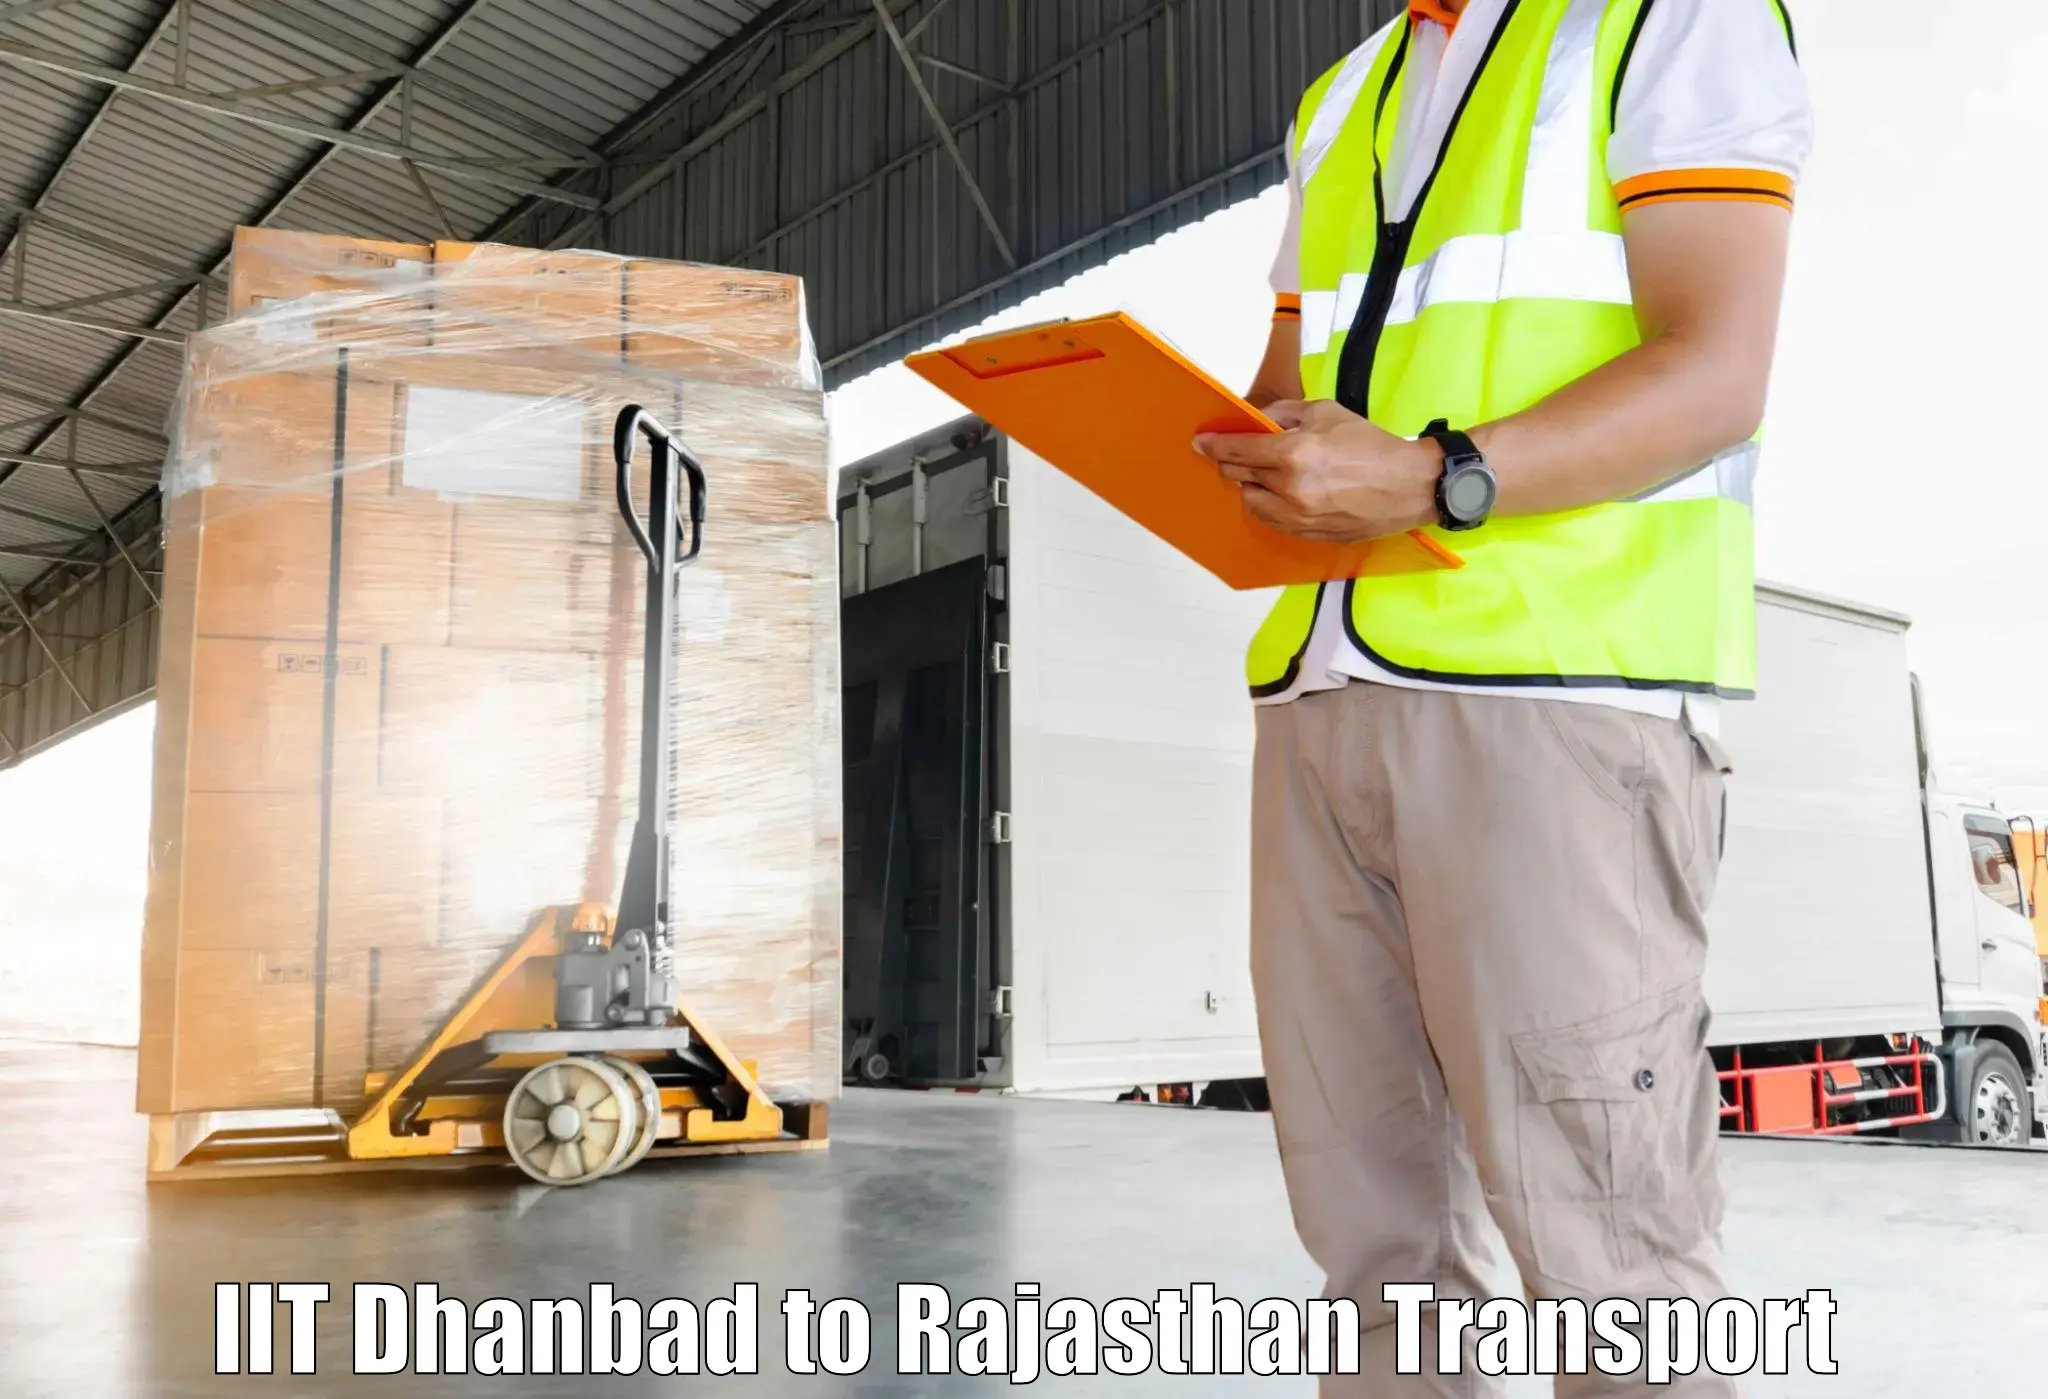 Commercial transport service IIT Dhanbad to Phulera